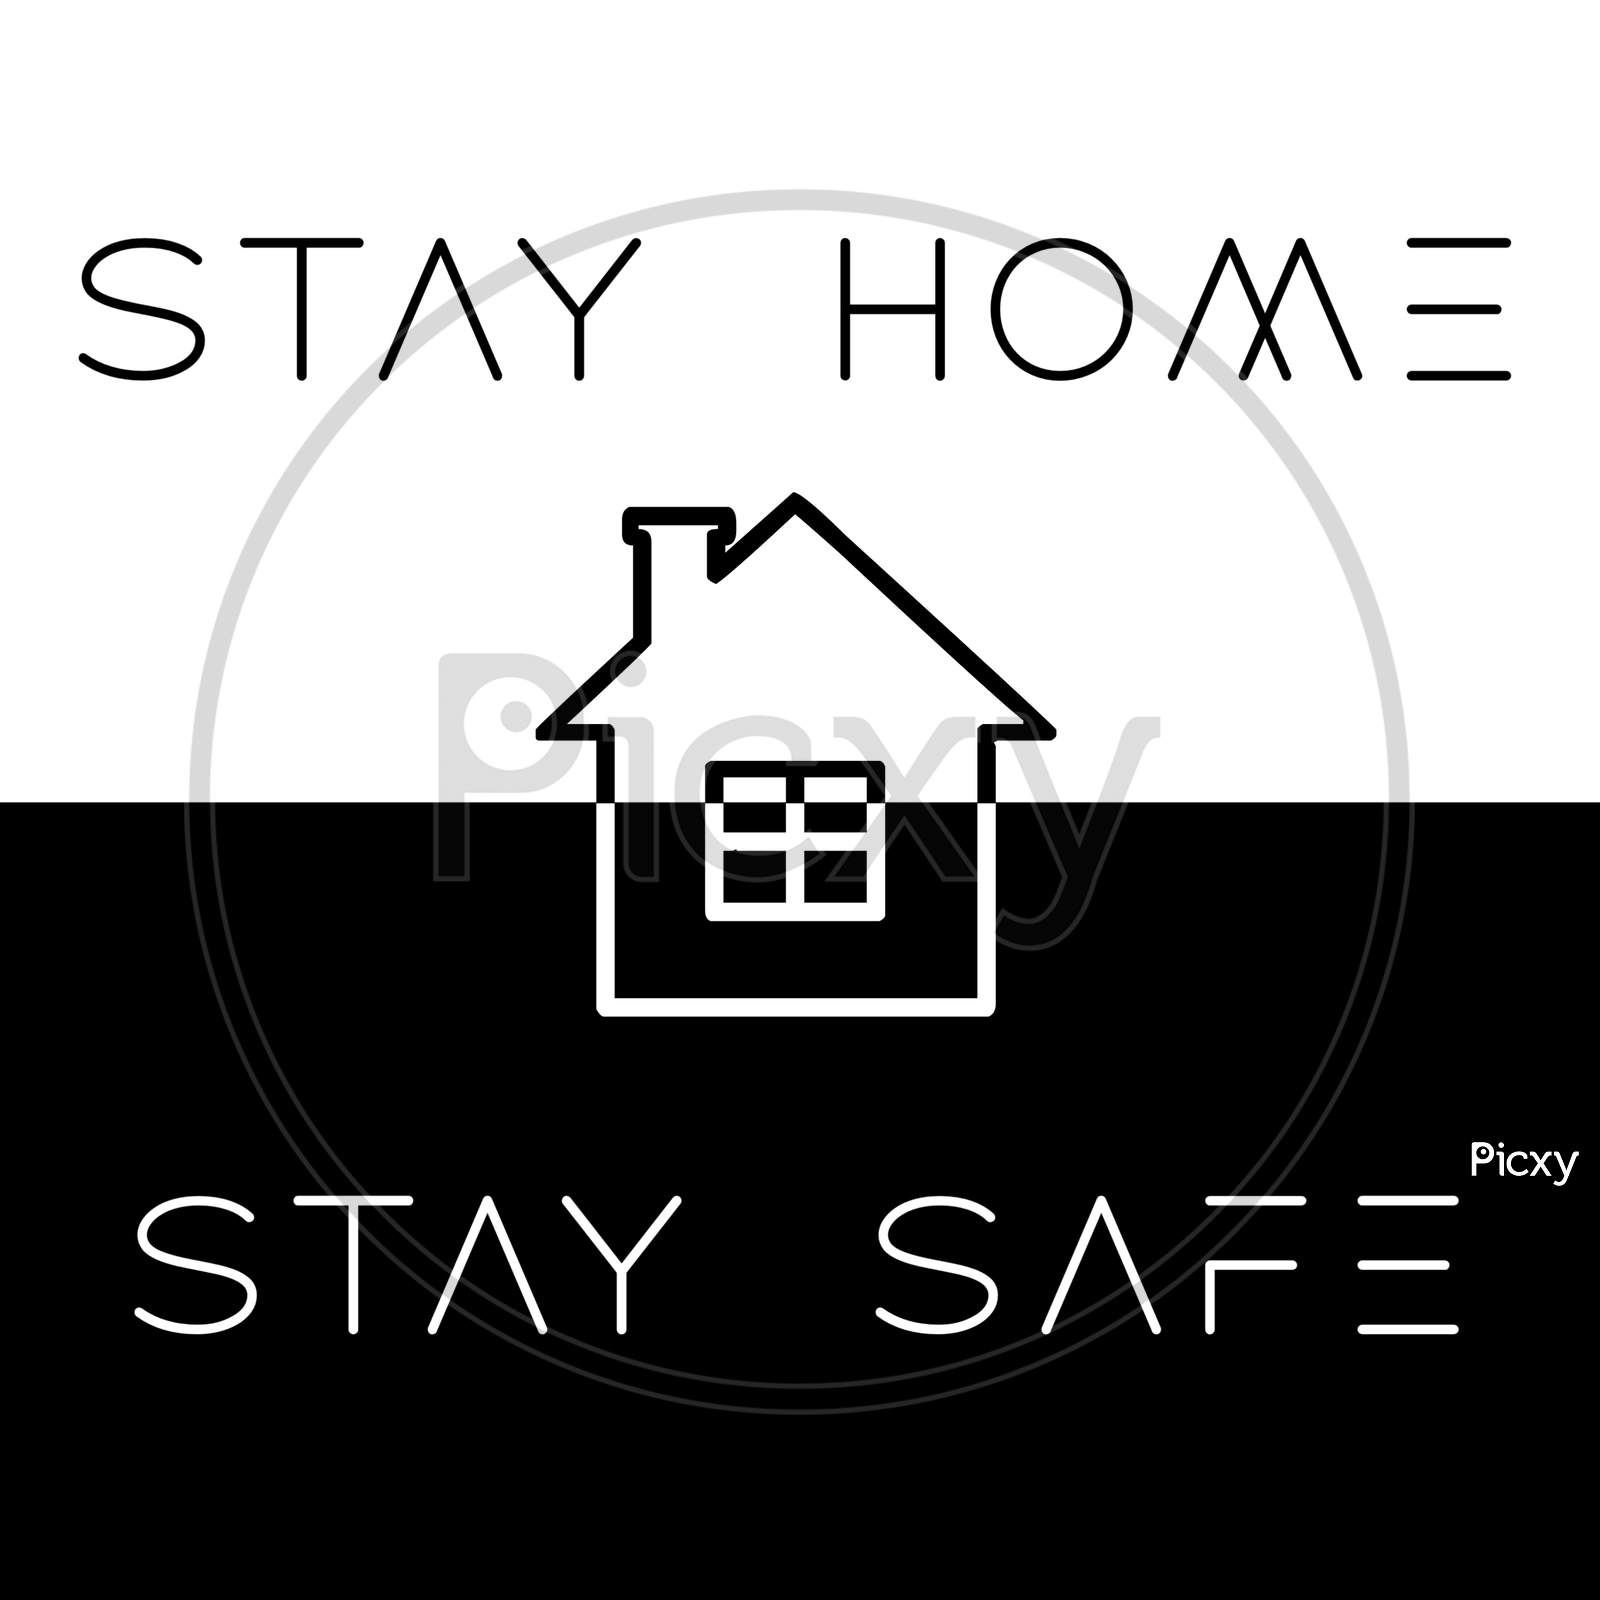 Stay Home Stay Safe (black and white background with black and white color fonts)